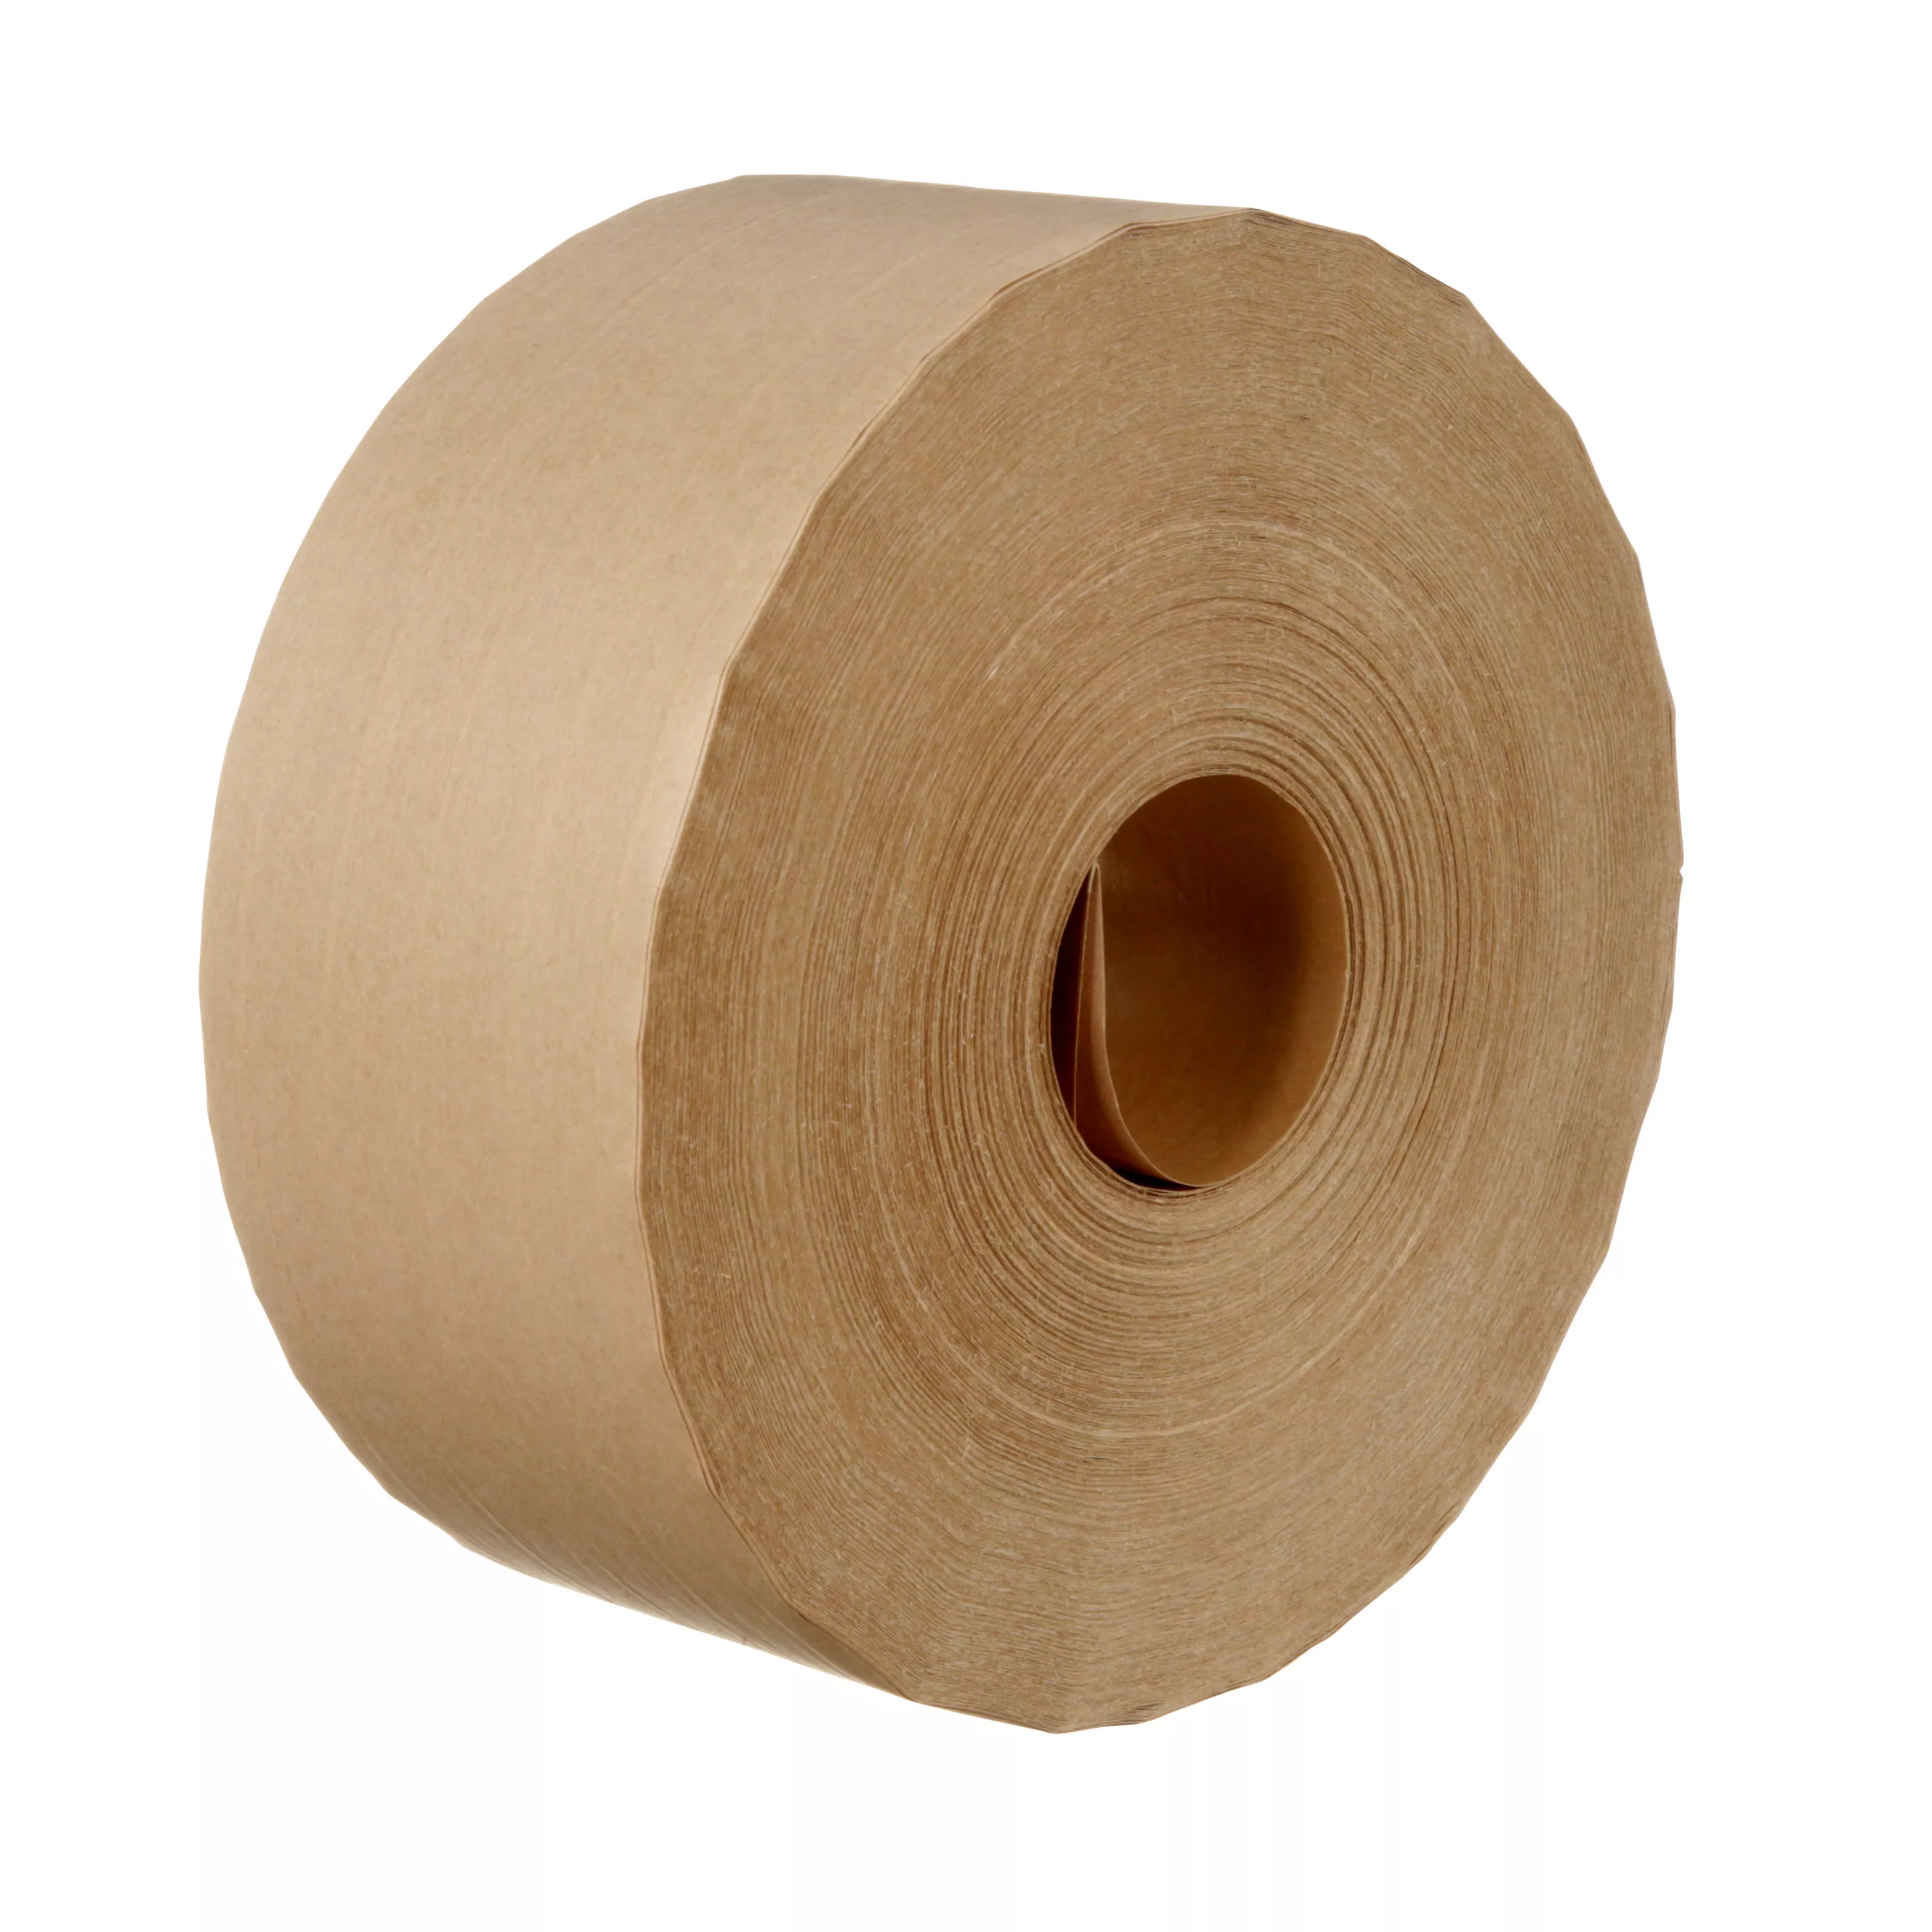 3M™ Water Activated Paper Tape 6147, Natural, Performance Reinforced, 3
in x 450 ft, 10/Case